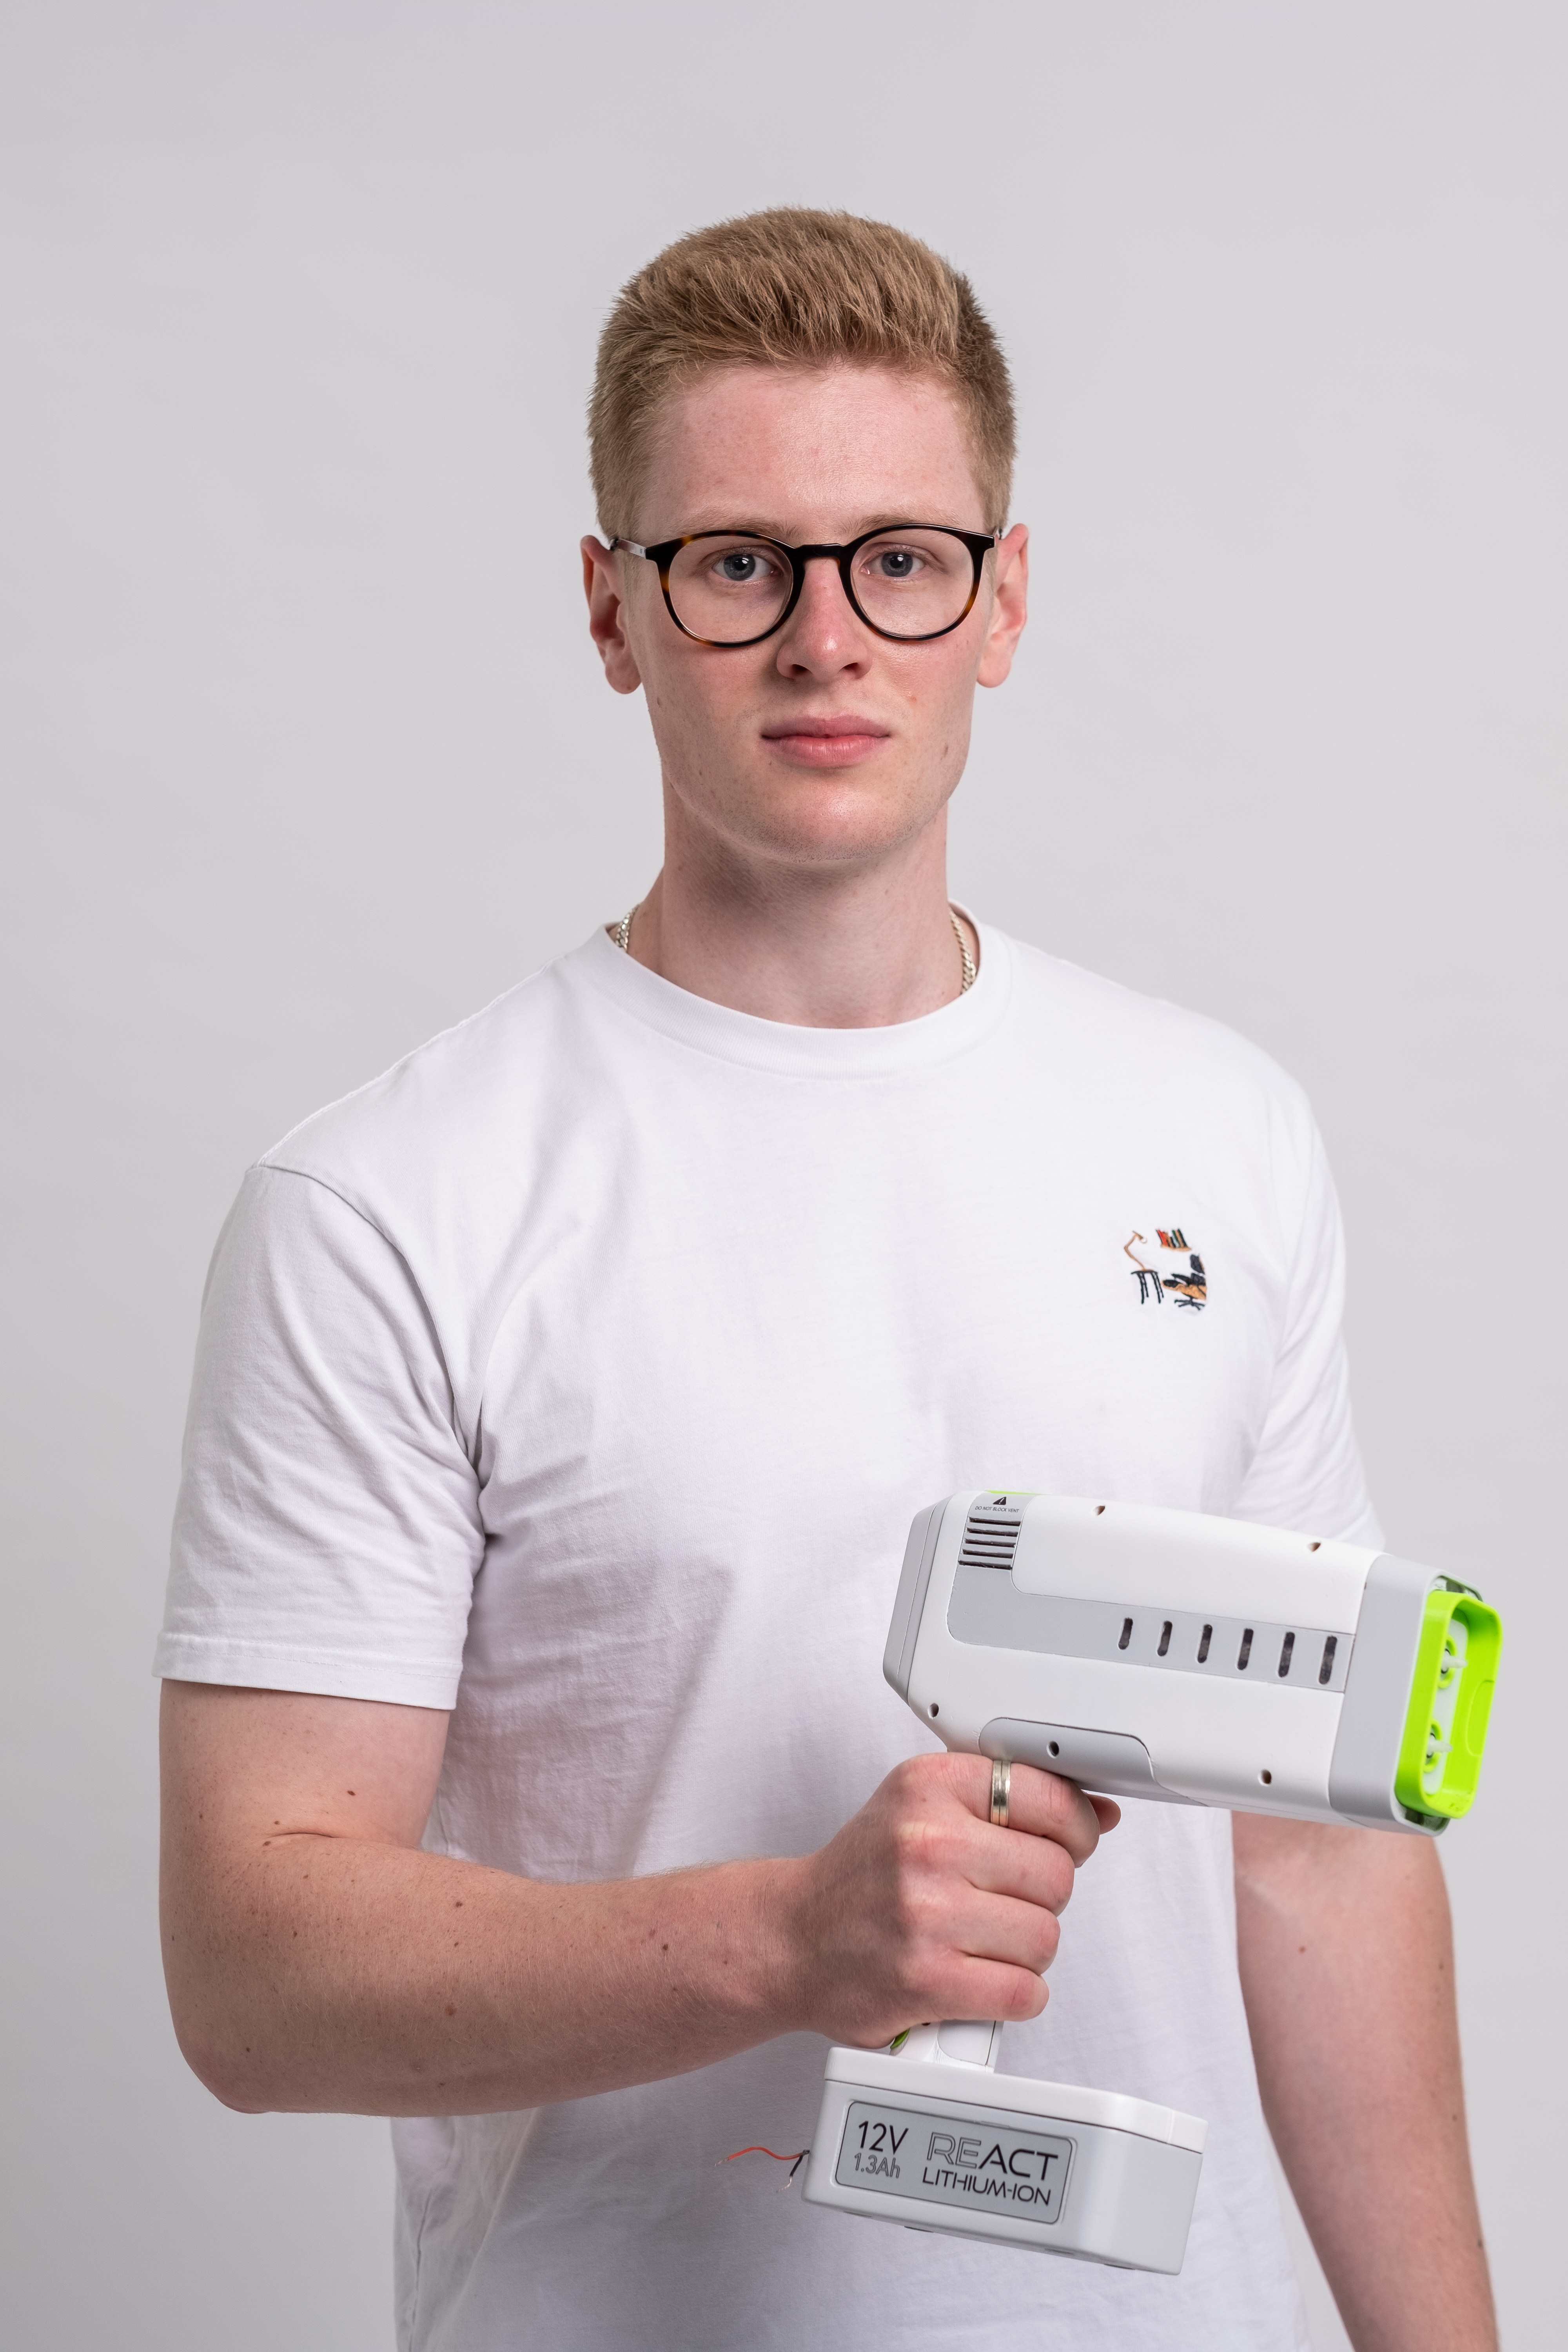 Joseph Bentley, aged 22 from Essex, designs device that can quickly stem blood loss from stab victims